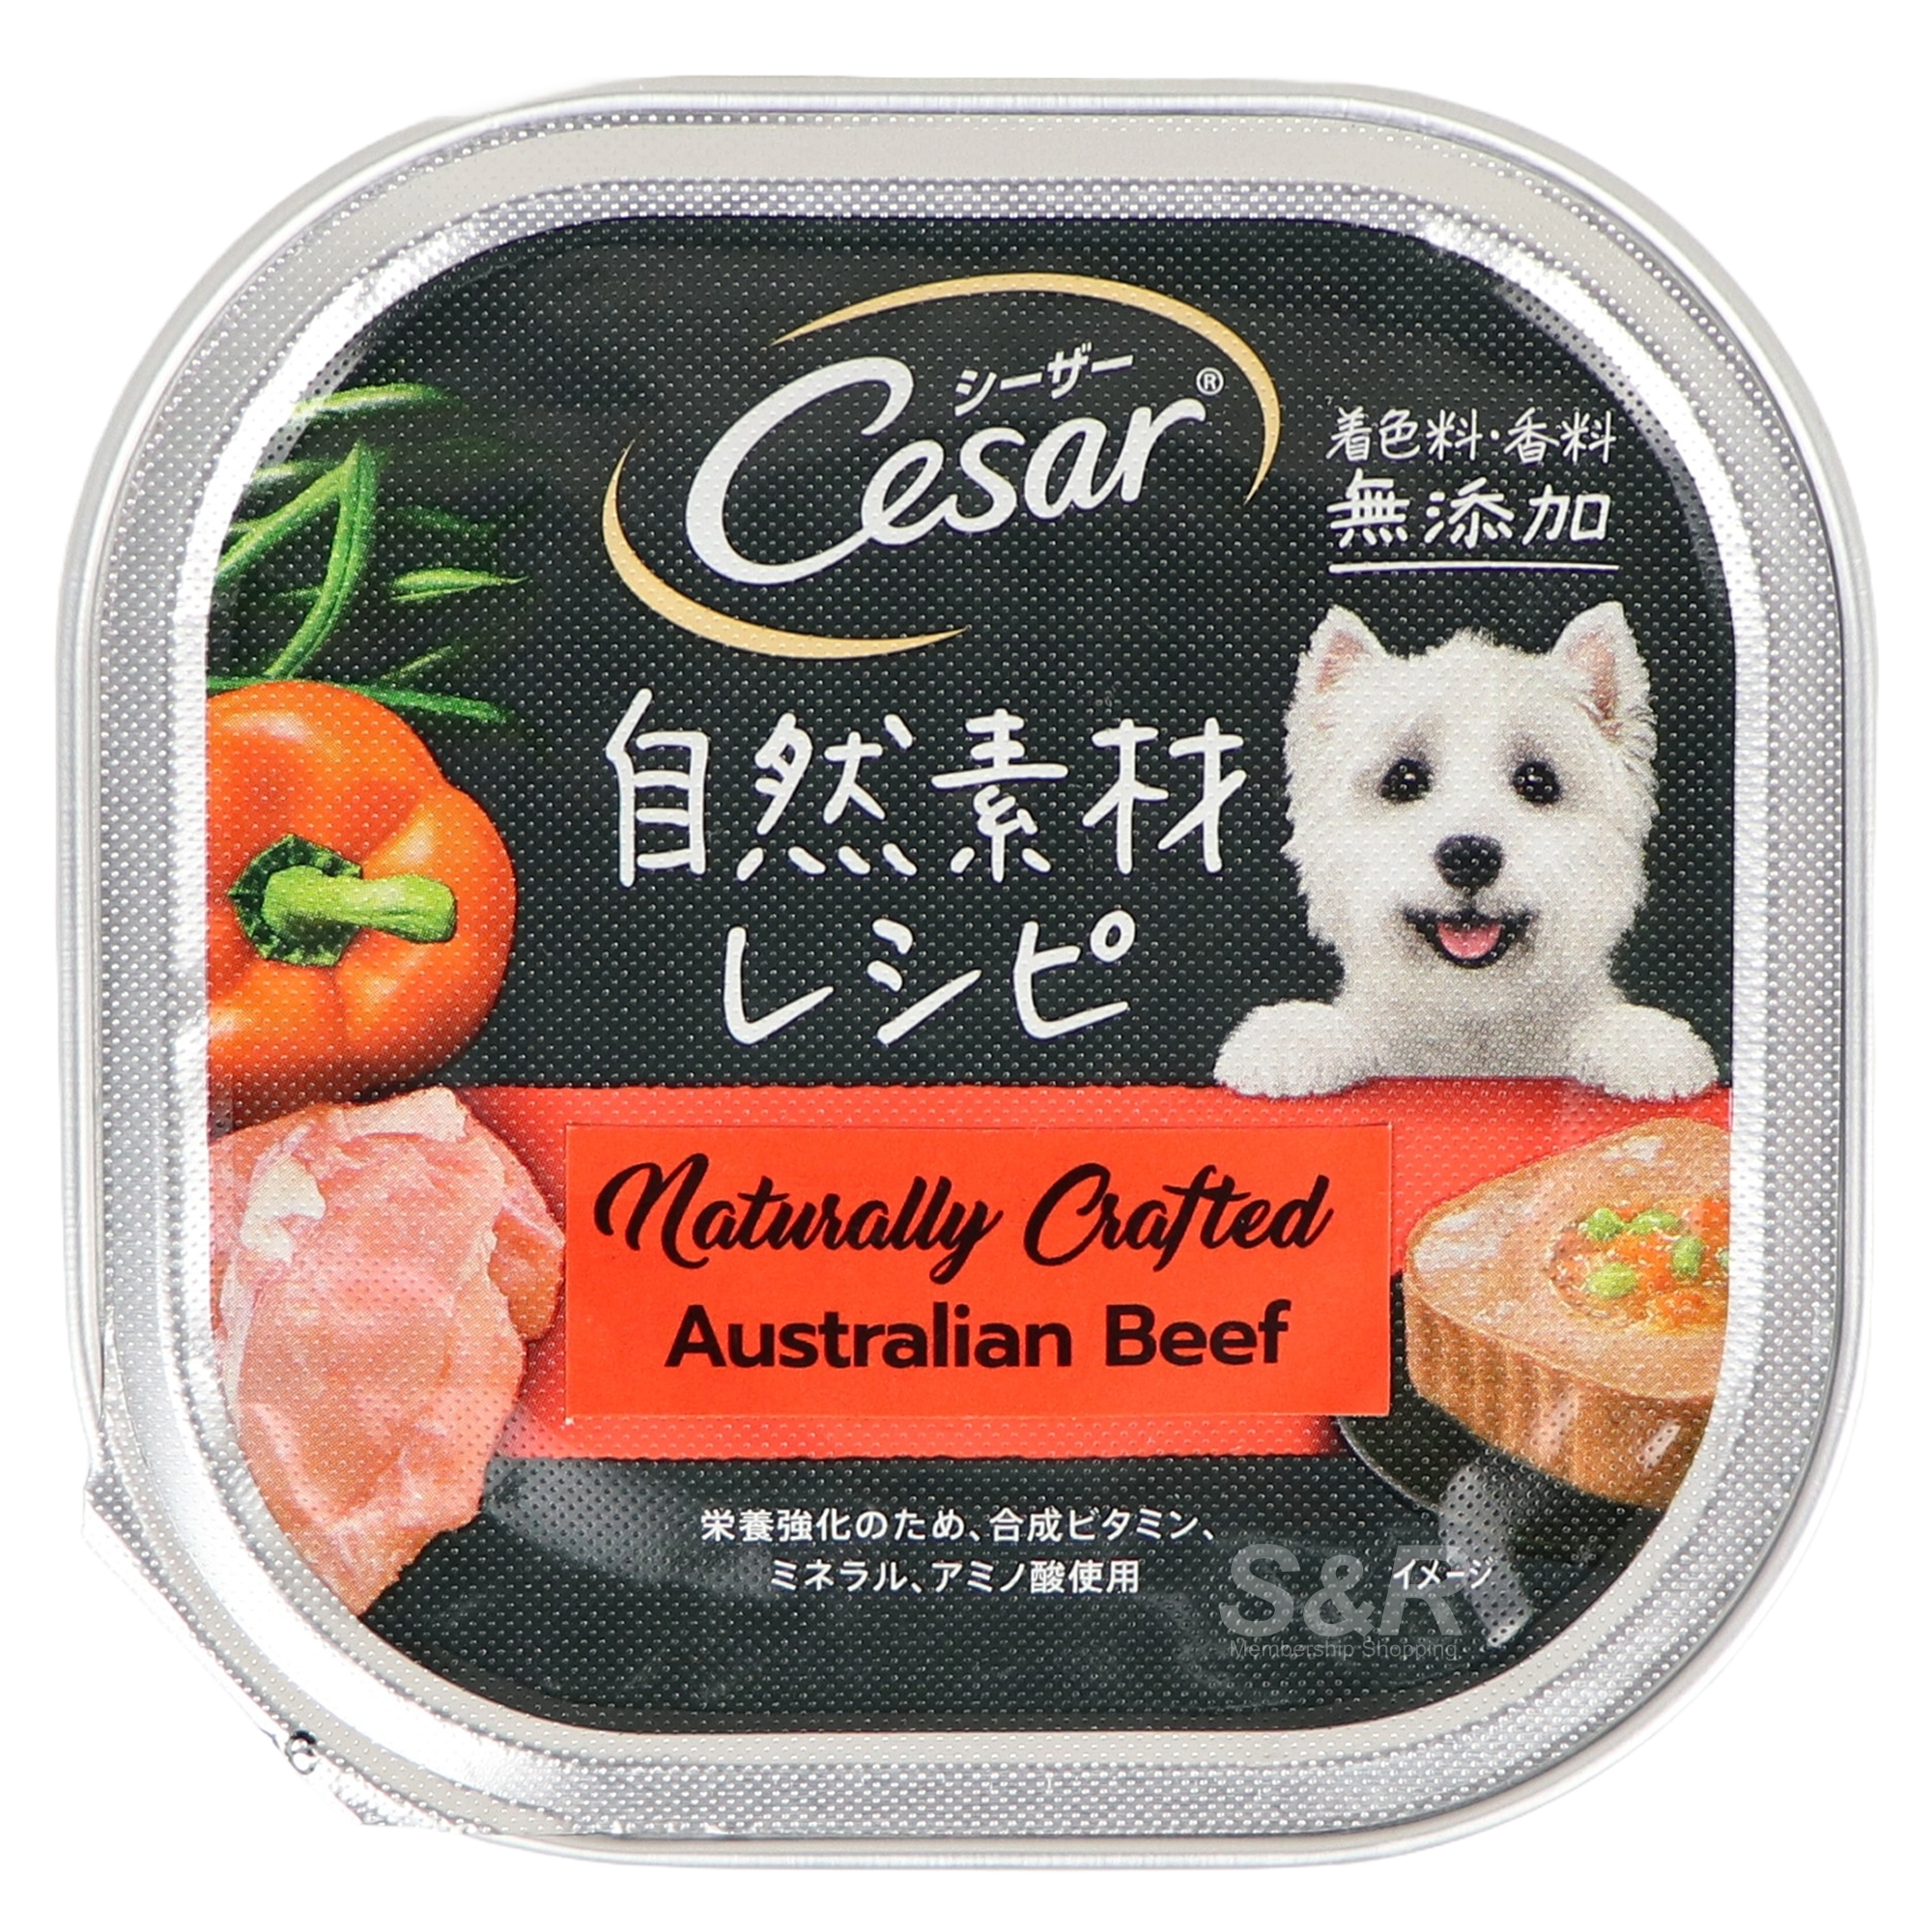 Cesar Naturally Crafted Australian Beef with Capsicum and Green Beans Dog Food 85g